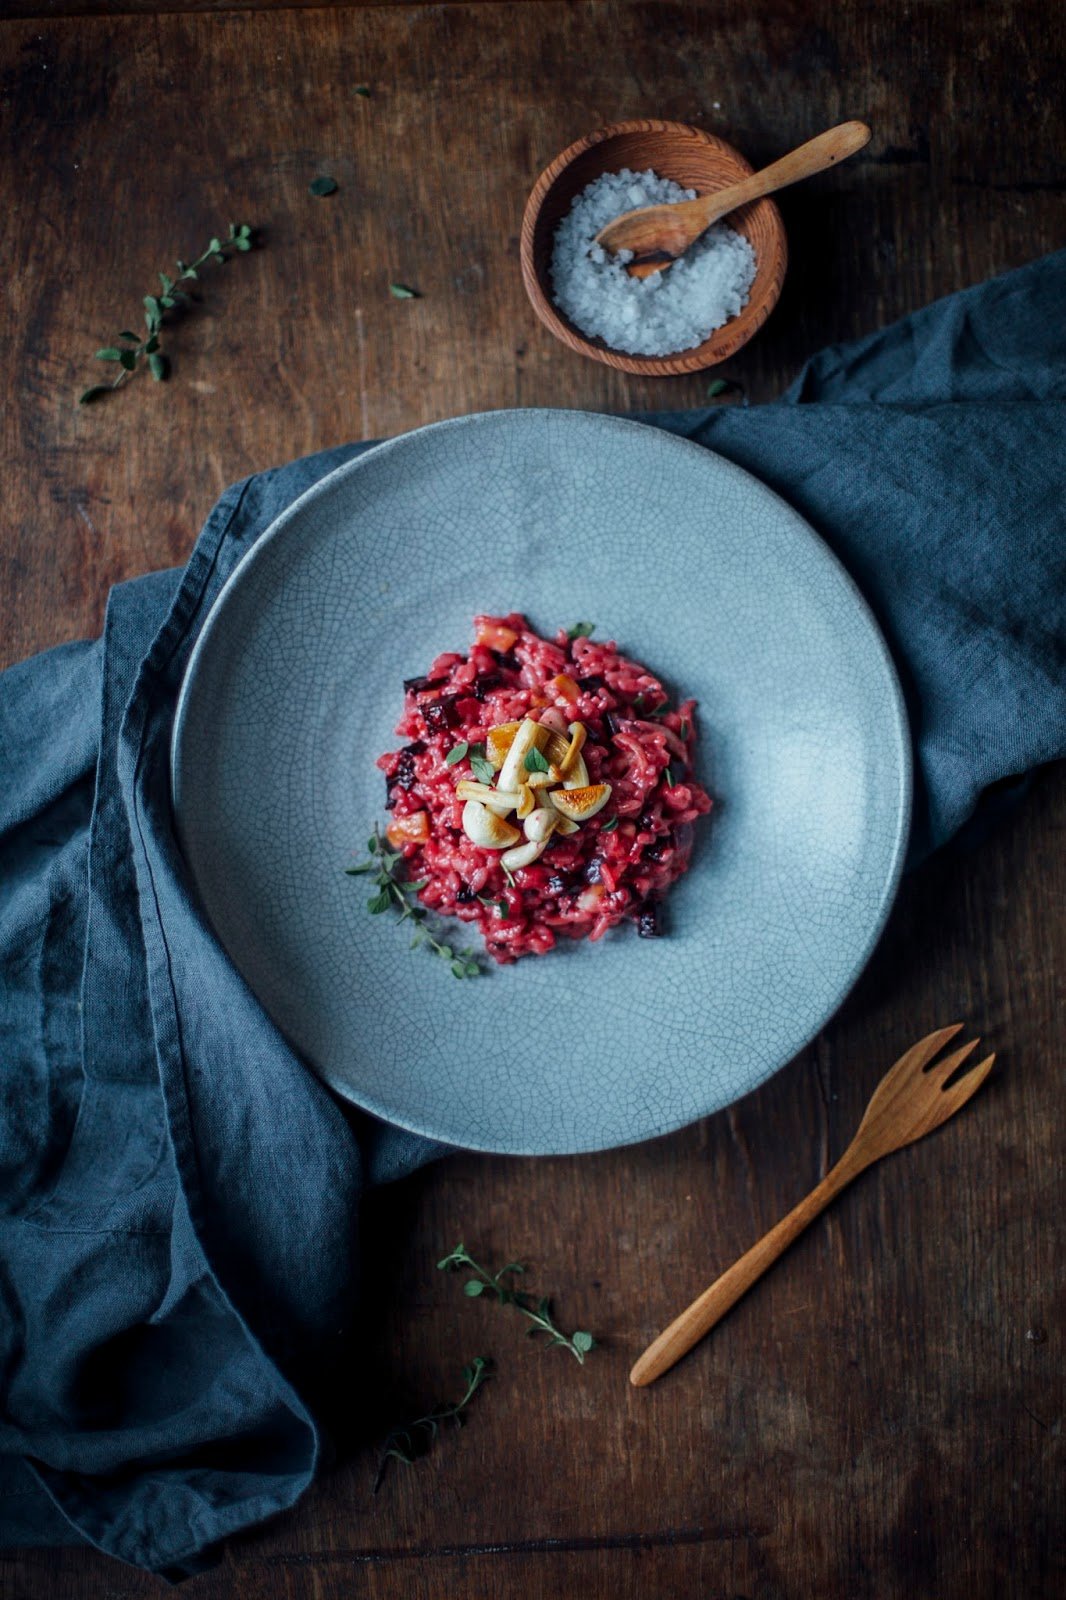 Beetroot Risotto with Mushrooms and Truffle Pecorino